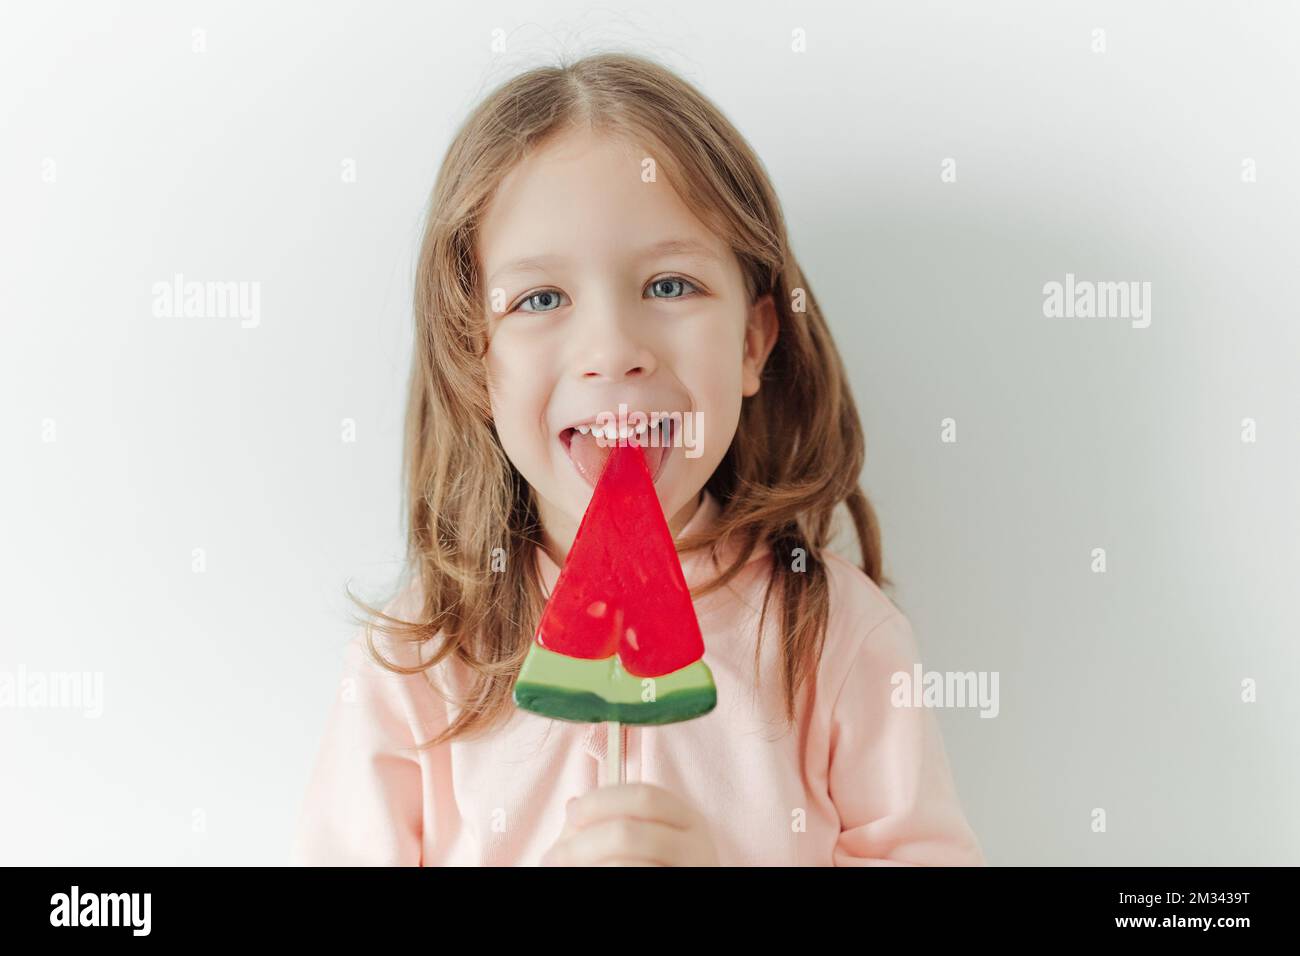 Cute happy and positive little girl with watermelon lollipop. White background. Vacation and summer mood concept Stock Photo